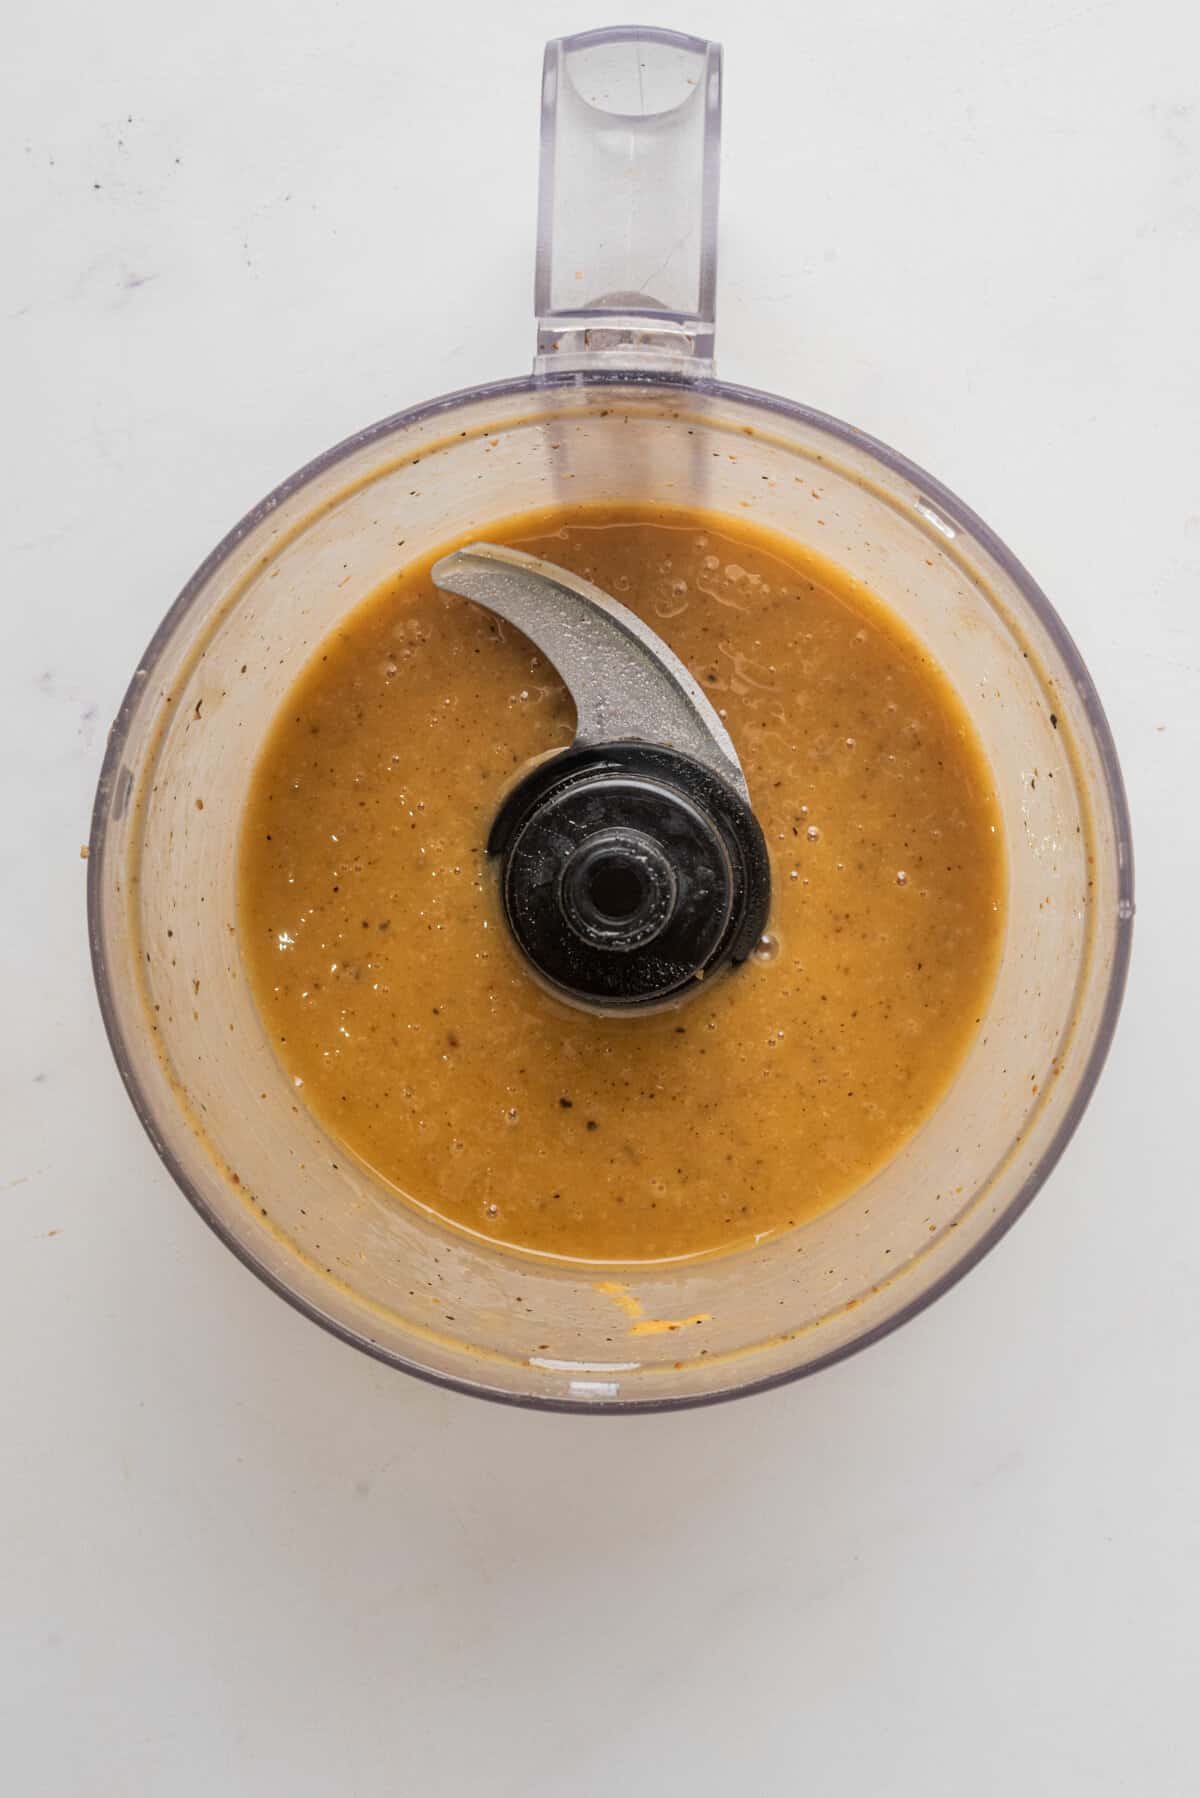 An image of the salad dressing mixed in a blender.